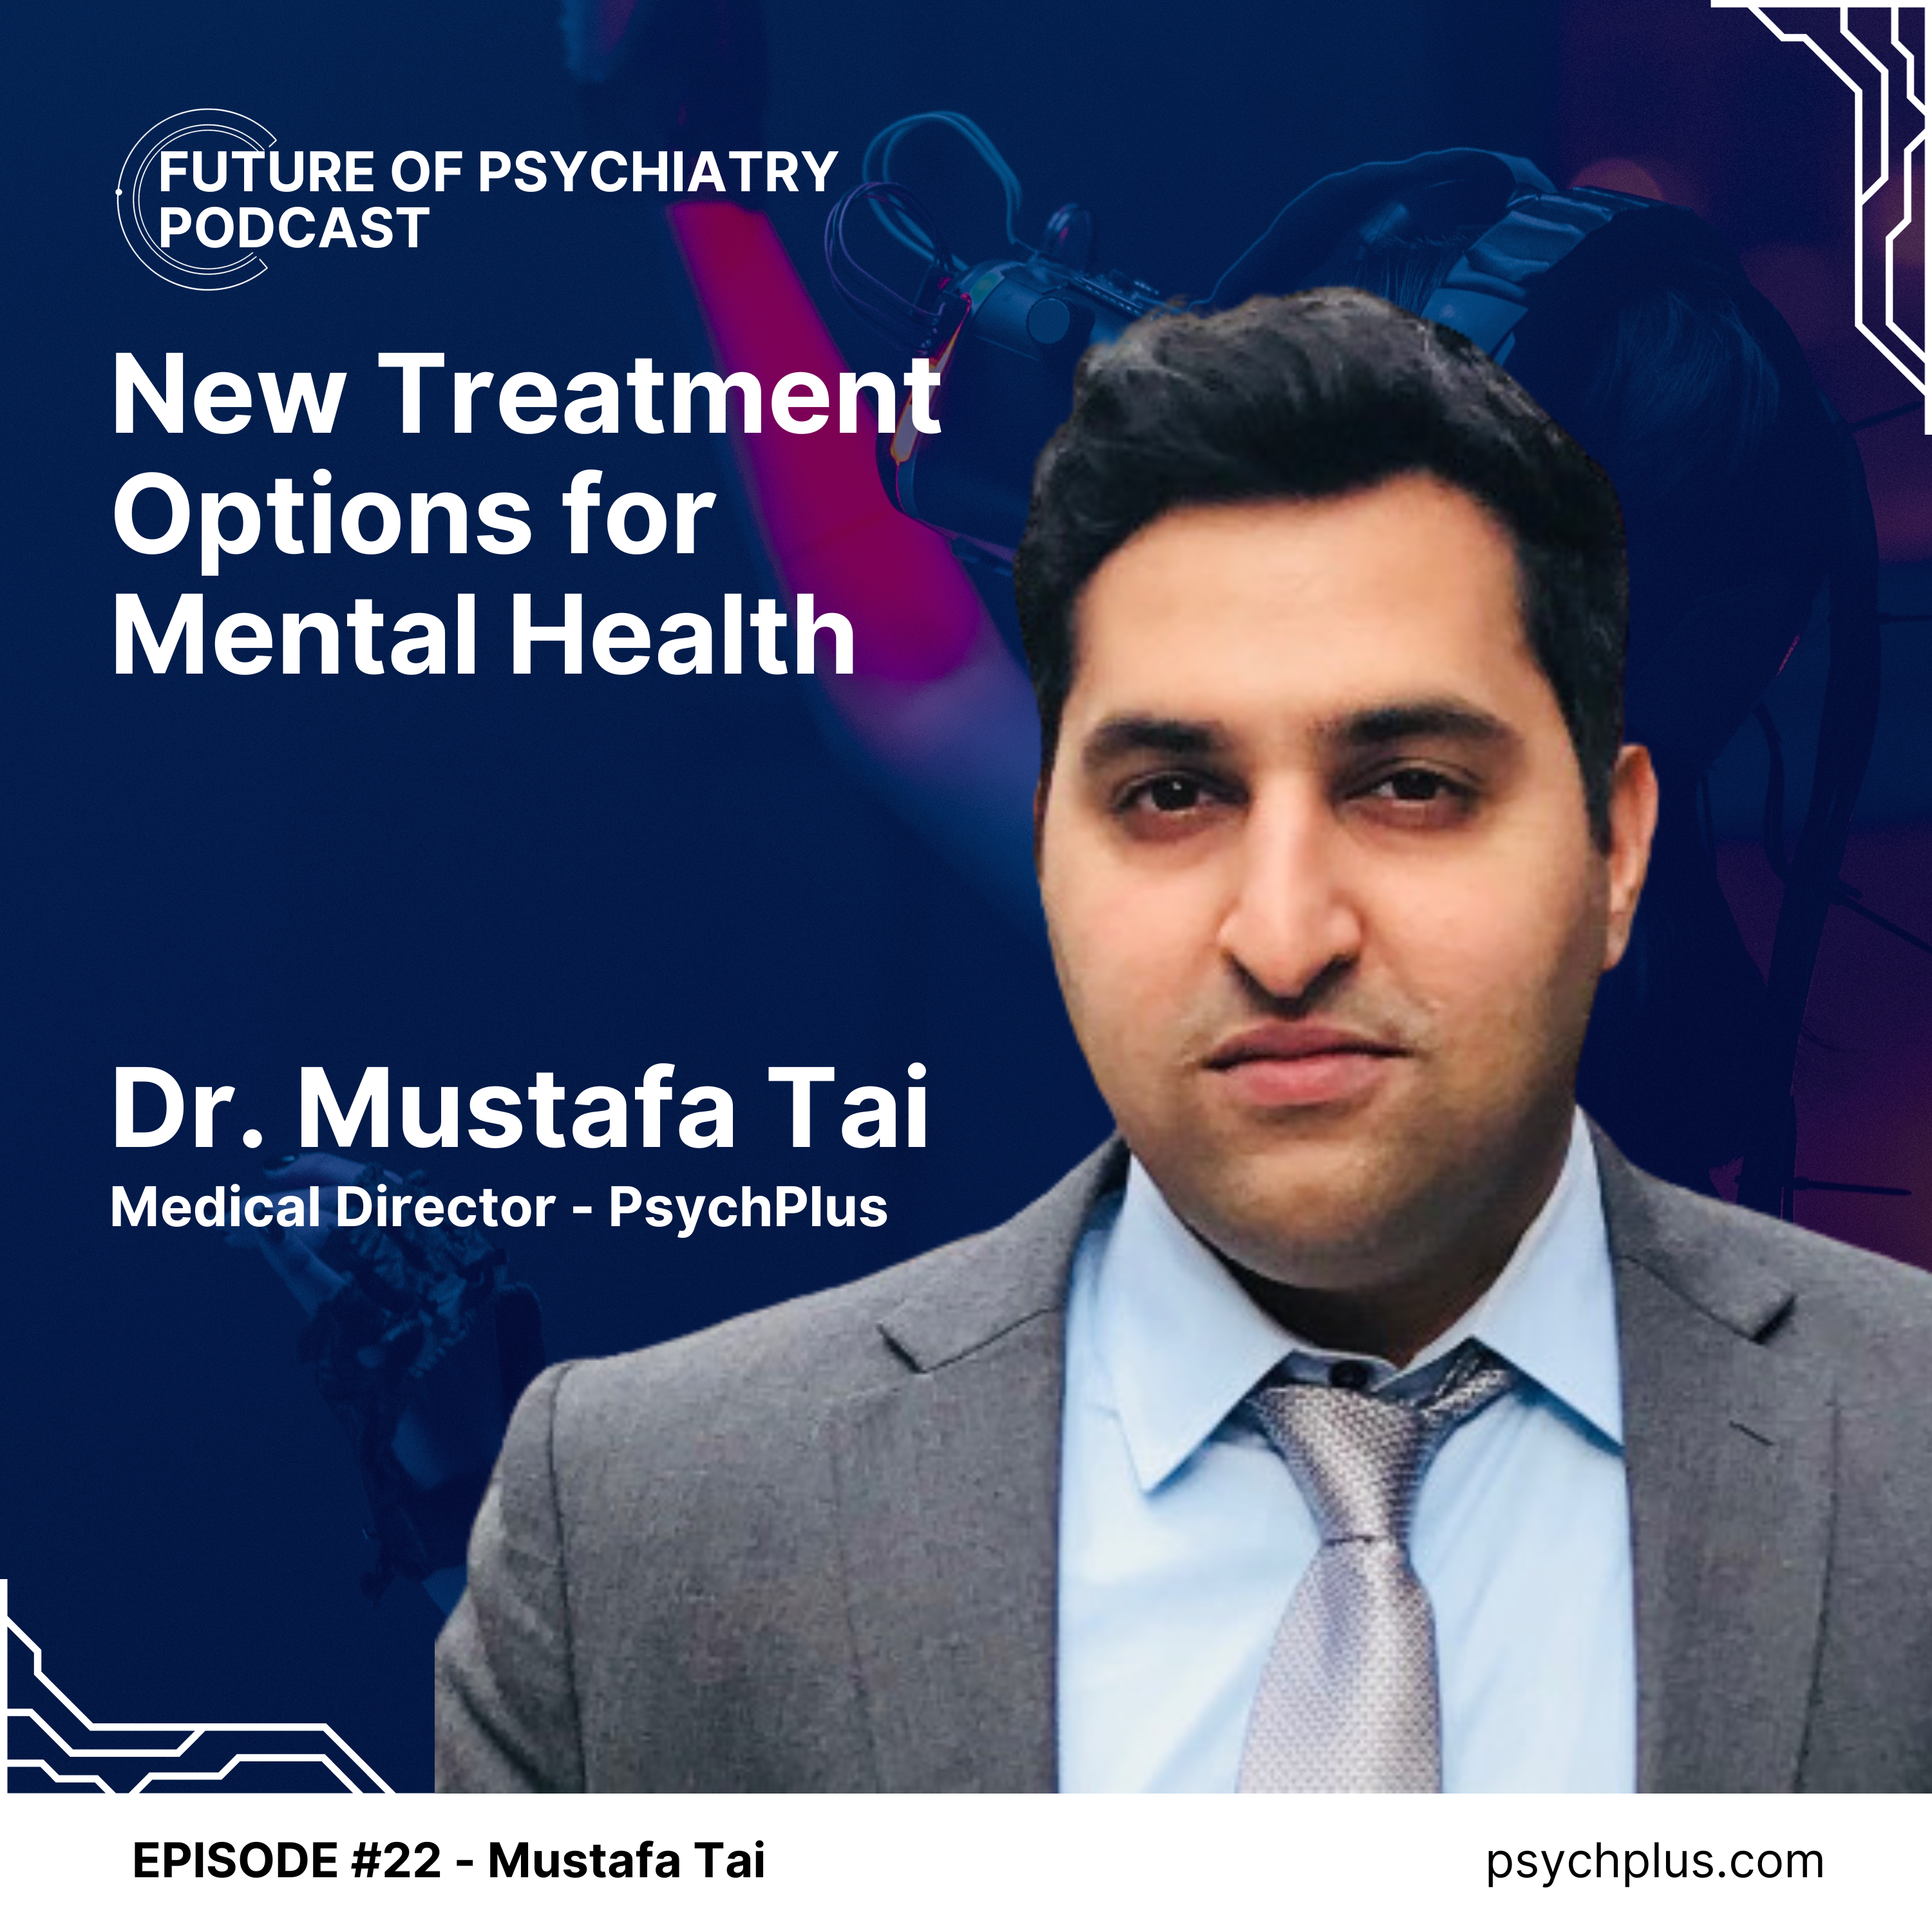 New Treatment Options for Mental Health With Dr Mustafa Tai from PsychPlus